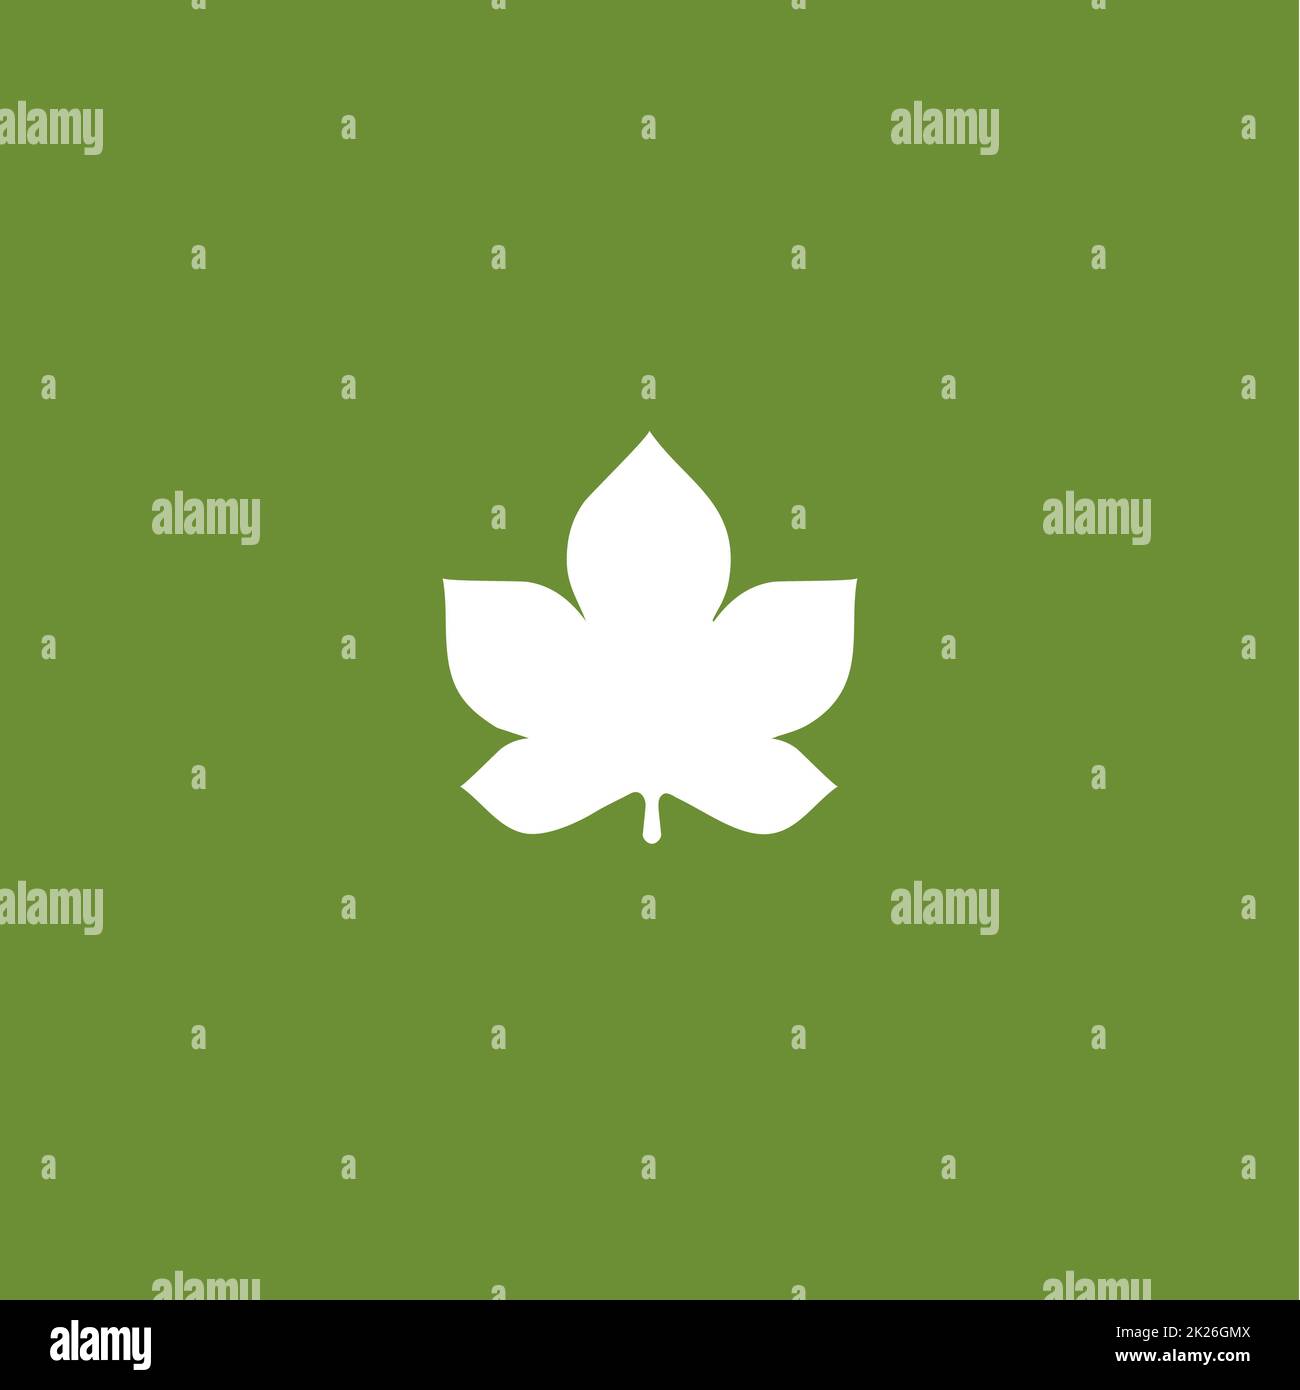 Chestnut leaf vector icon. Abstract silhouette of white leaf on green background. Vectors. Stock Photo